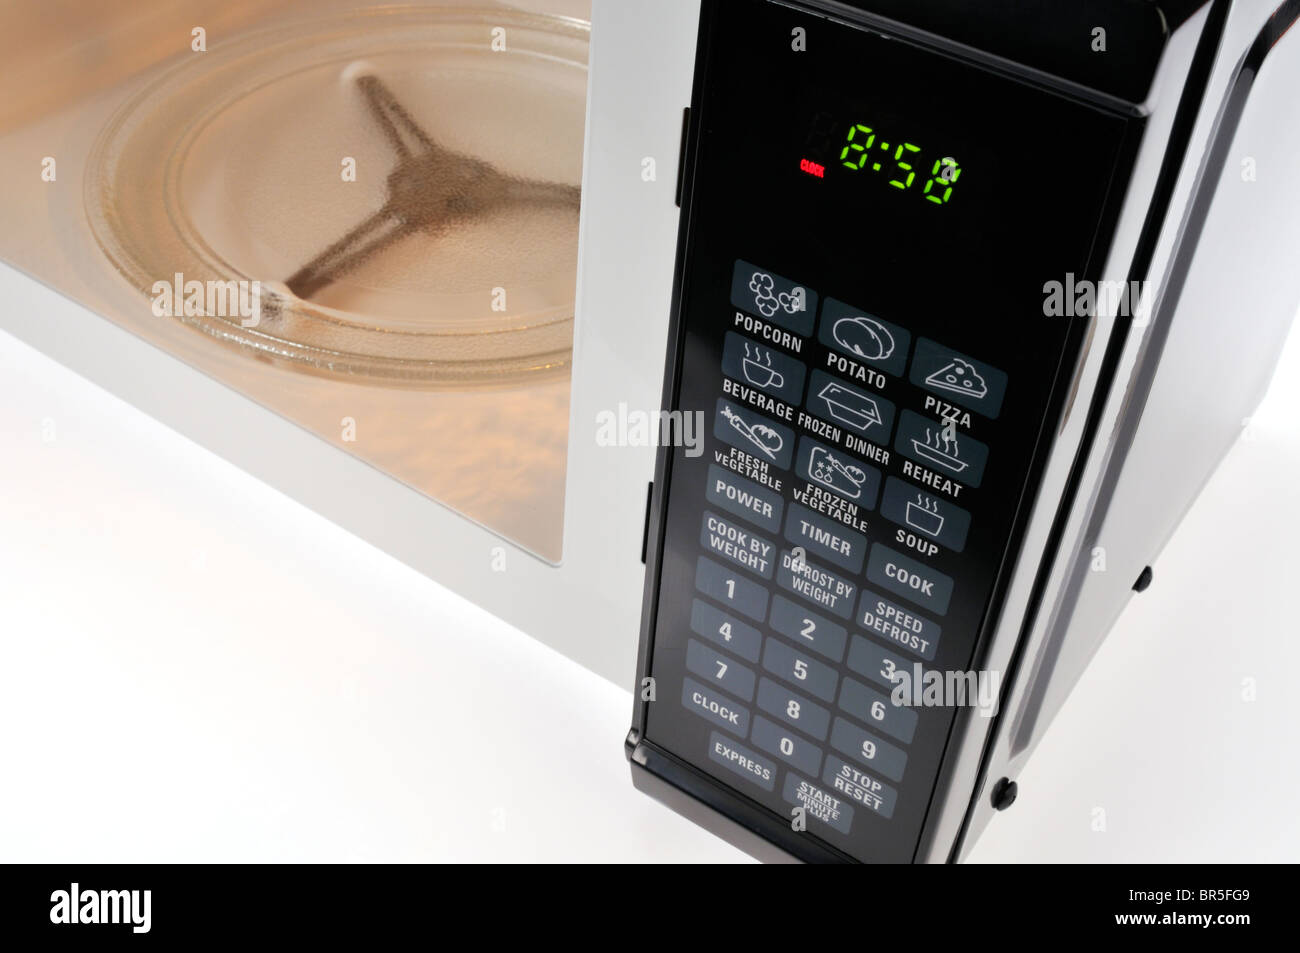 Microwave oven circular timer for one hour, analogue white. Stock Photo